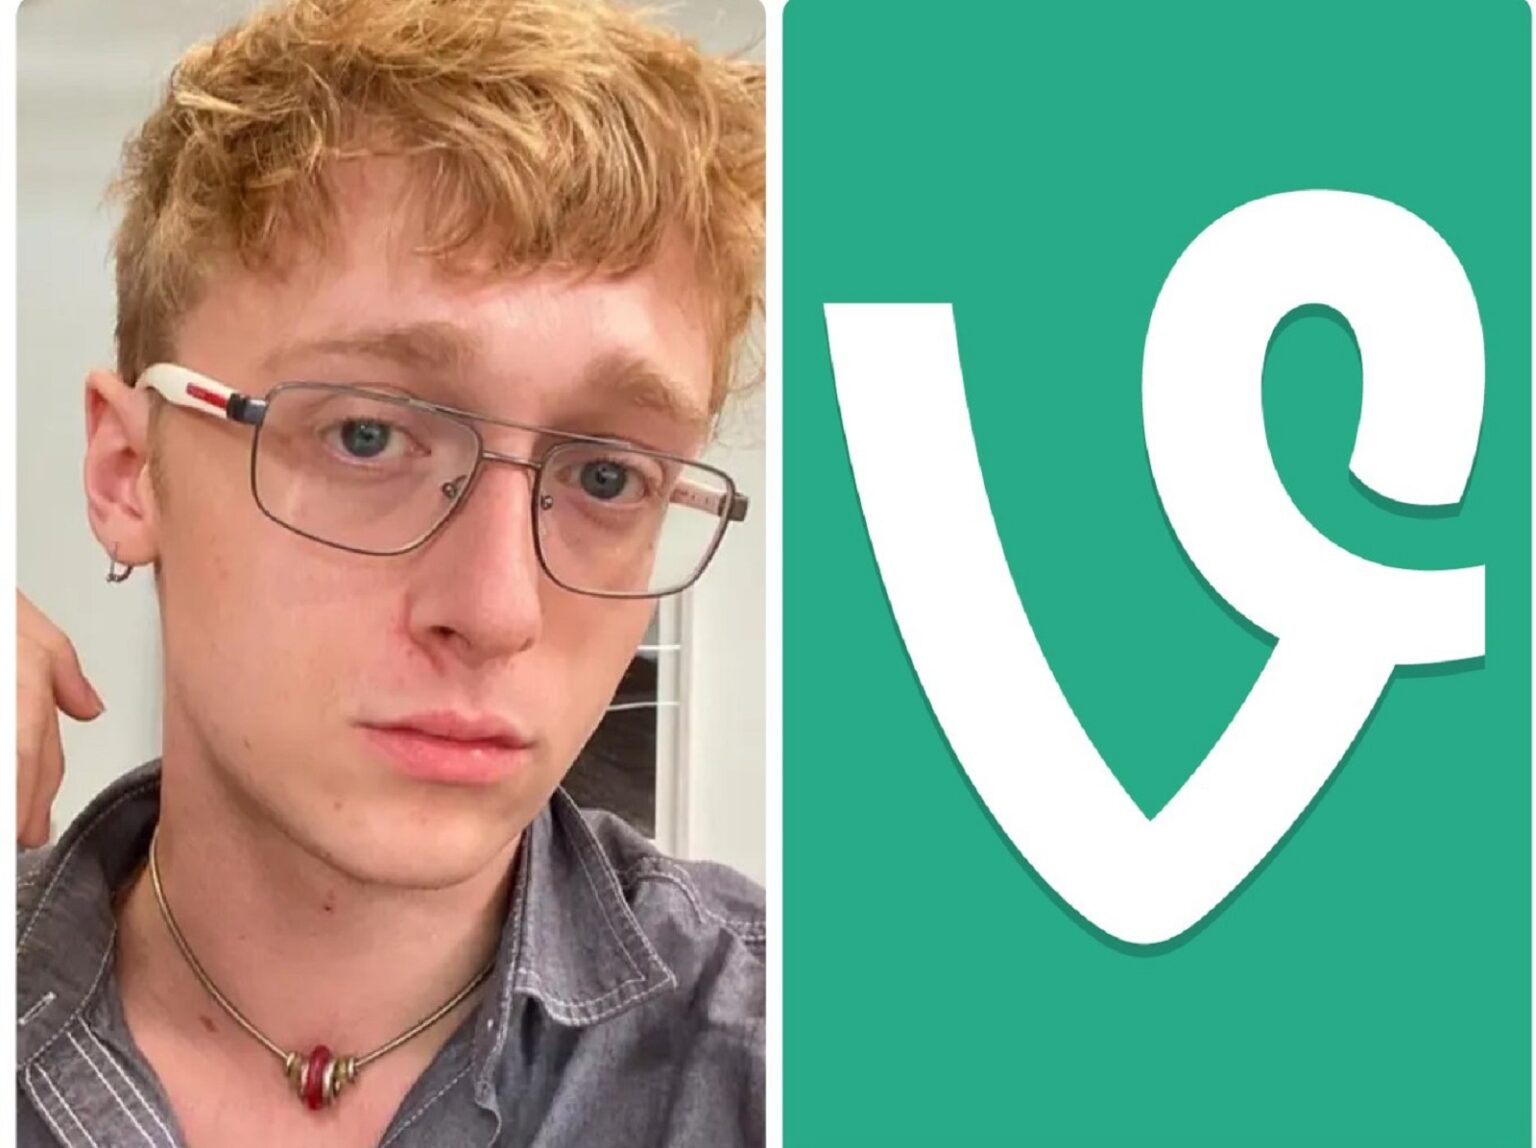 Adam Perkins has passed away. Join us in a six-second remembrance of the young influencer's life, as we celebrate his Vine videos and legacy.